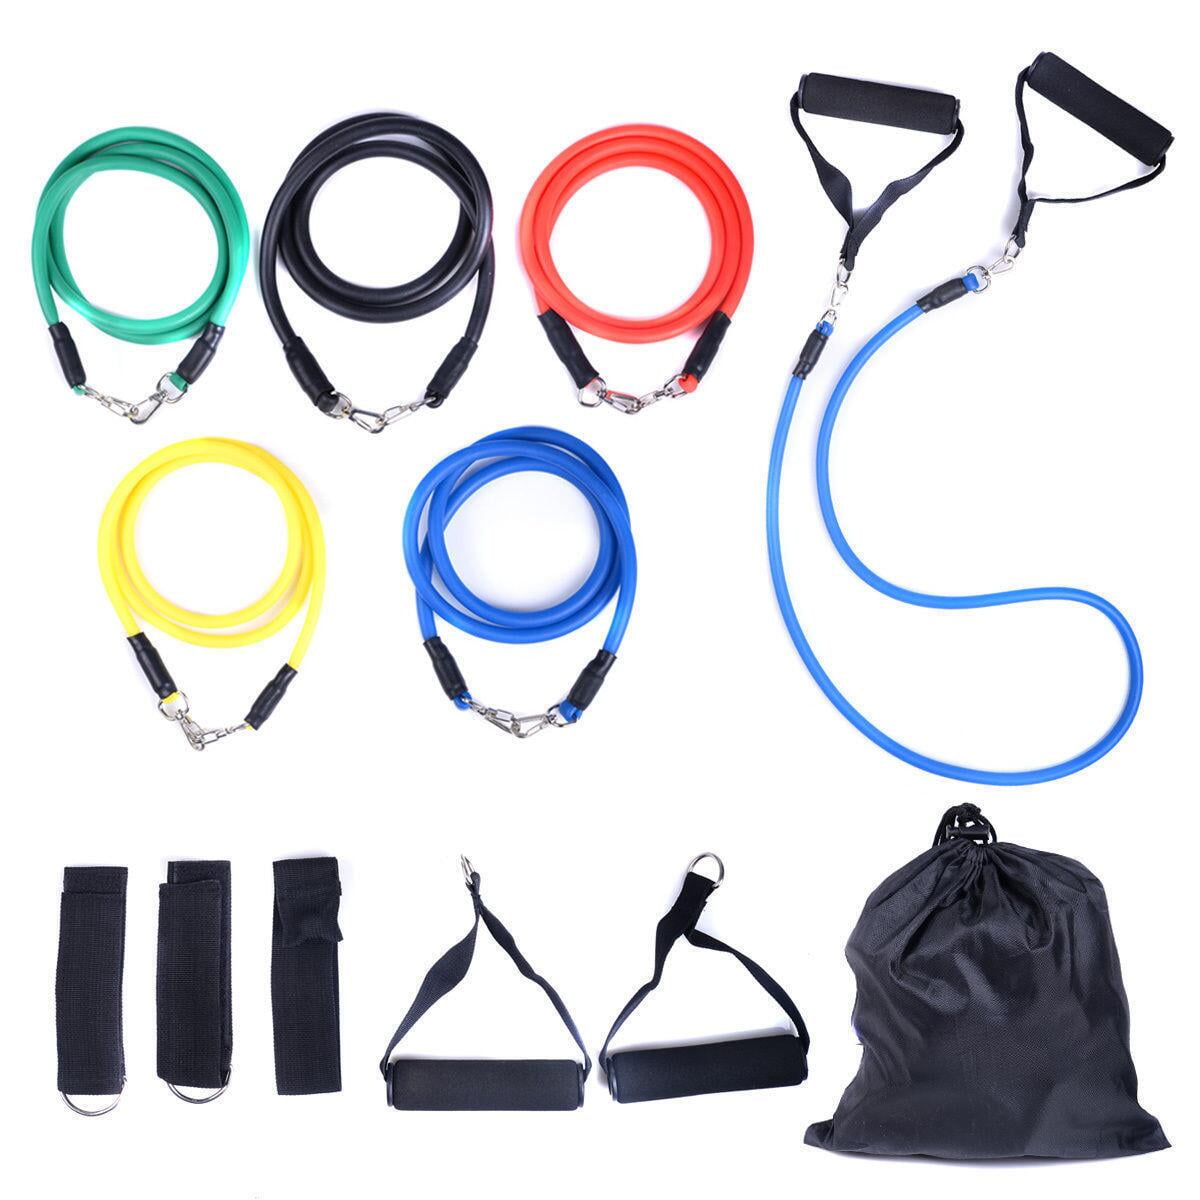 2020 RESISTANCE BANDS WORKOUT EXERCISE YOGA 11 PIECE SET CROSSFIT FITNESS TUBES 